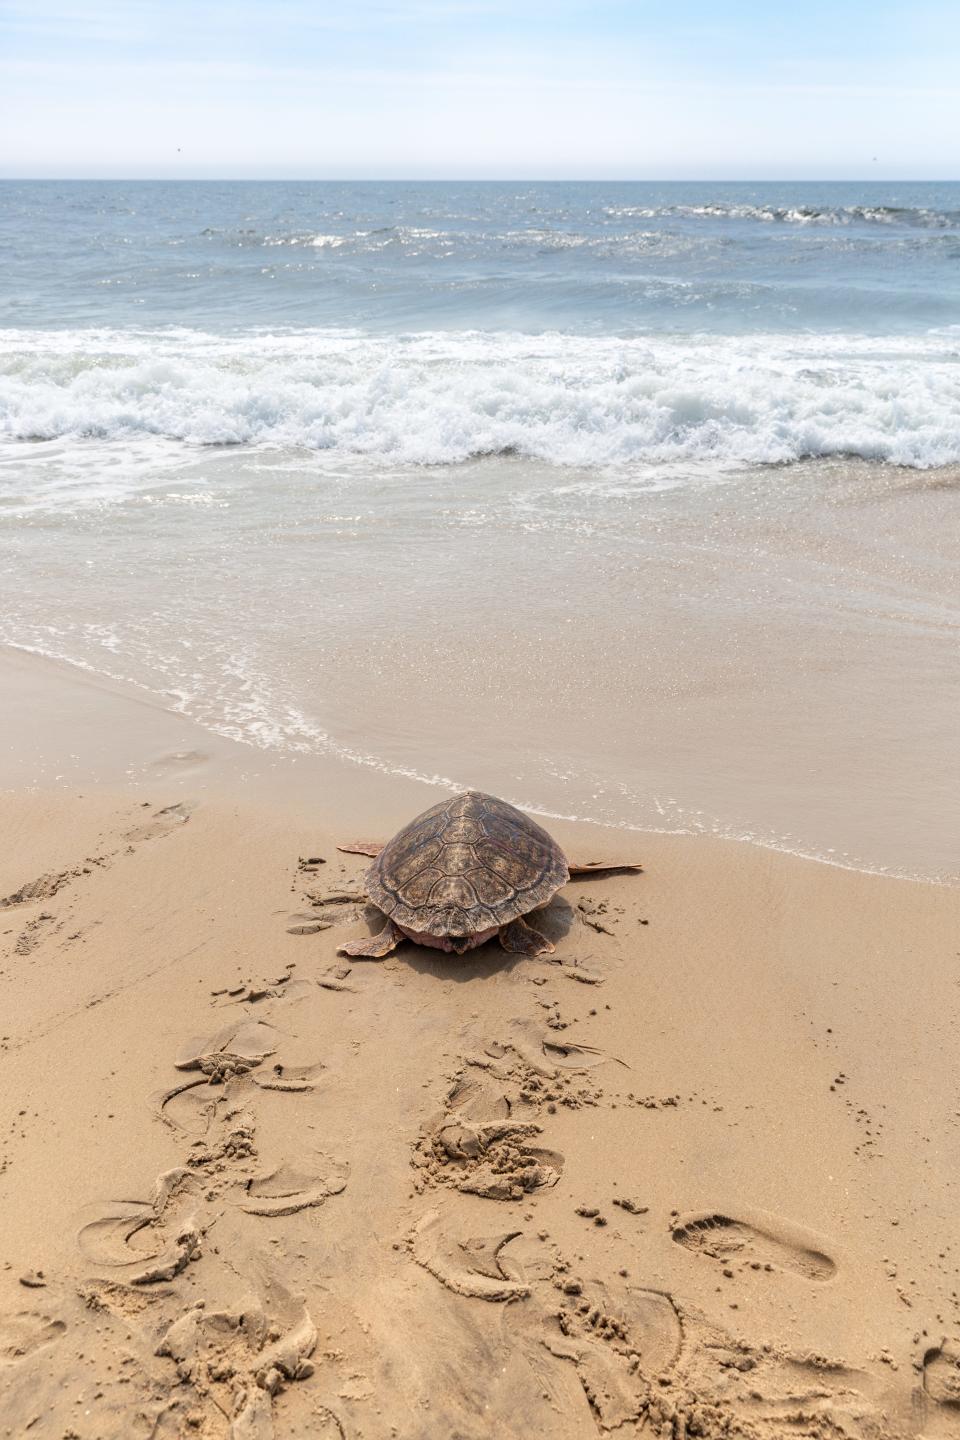 The National Aquarium's Animal Rescue Team released a group of four sea turtles at Assateague Island State Park on Thursday,  June 20, 2019.